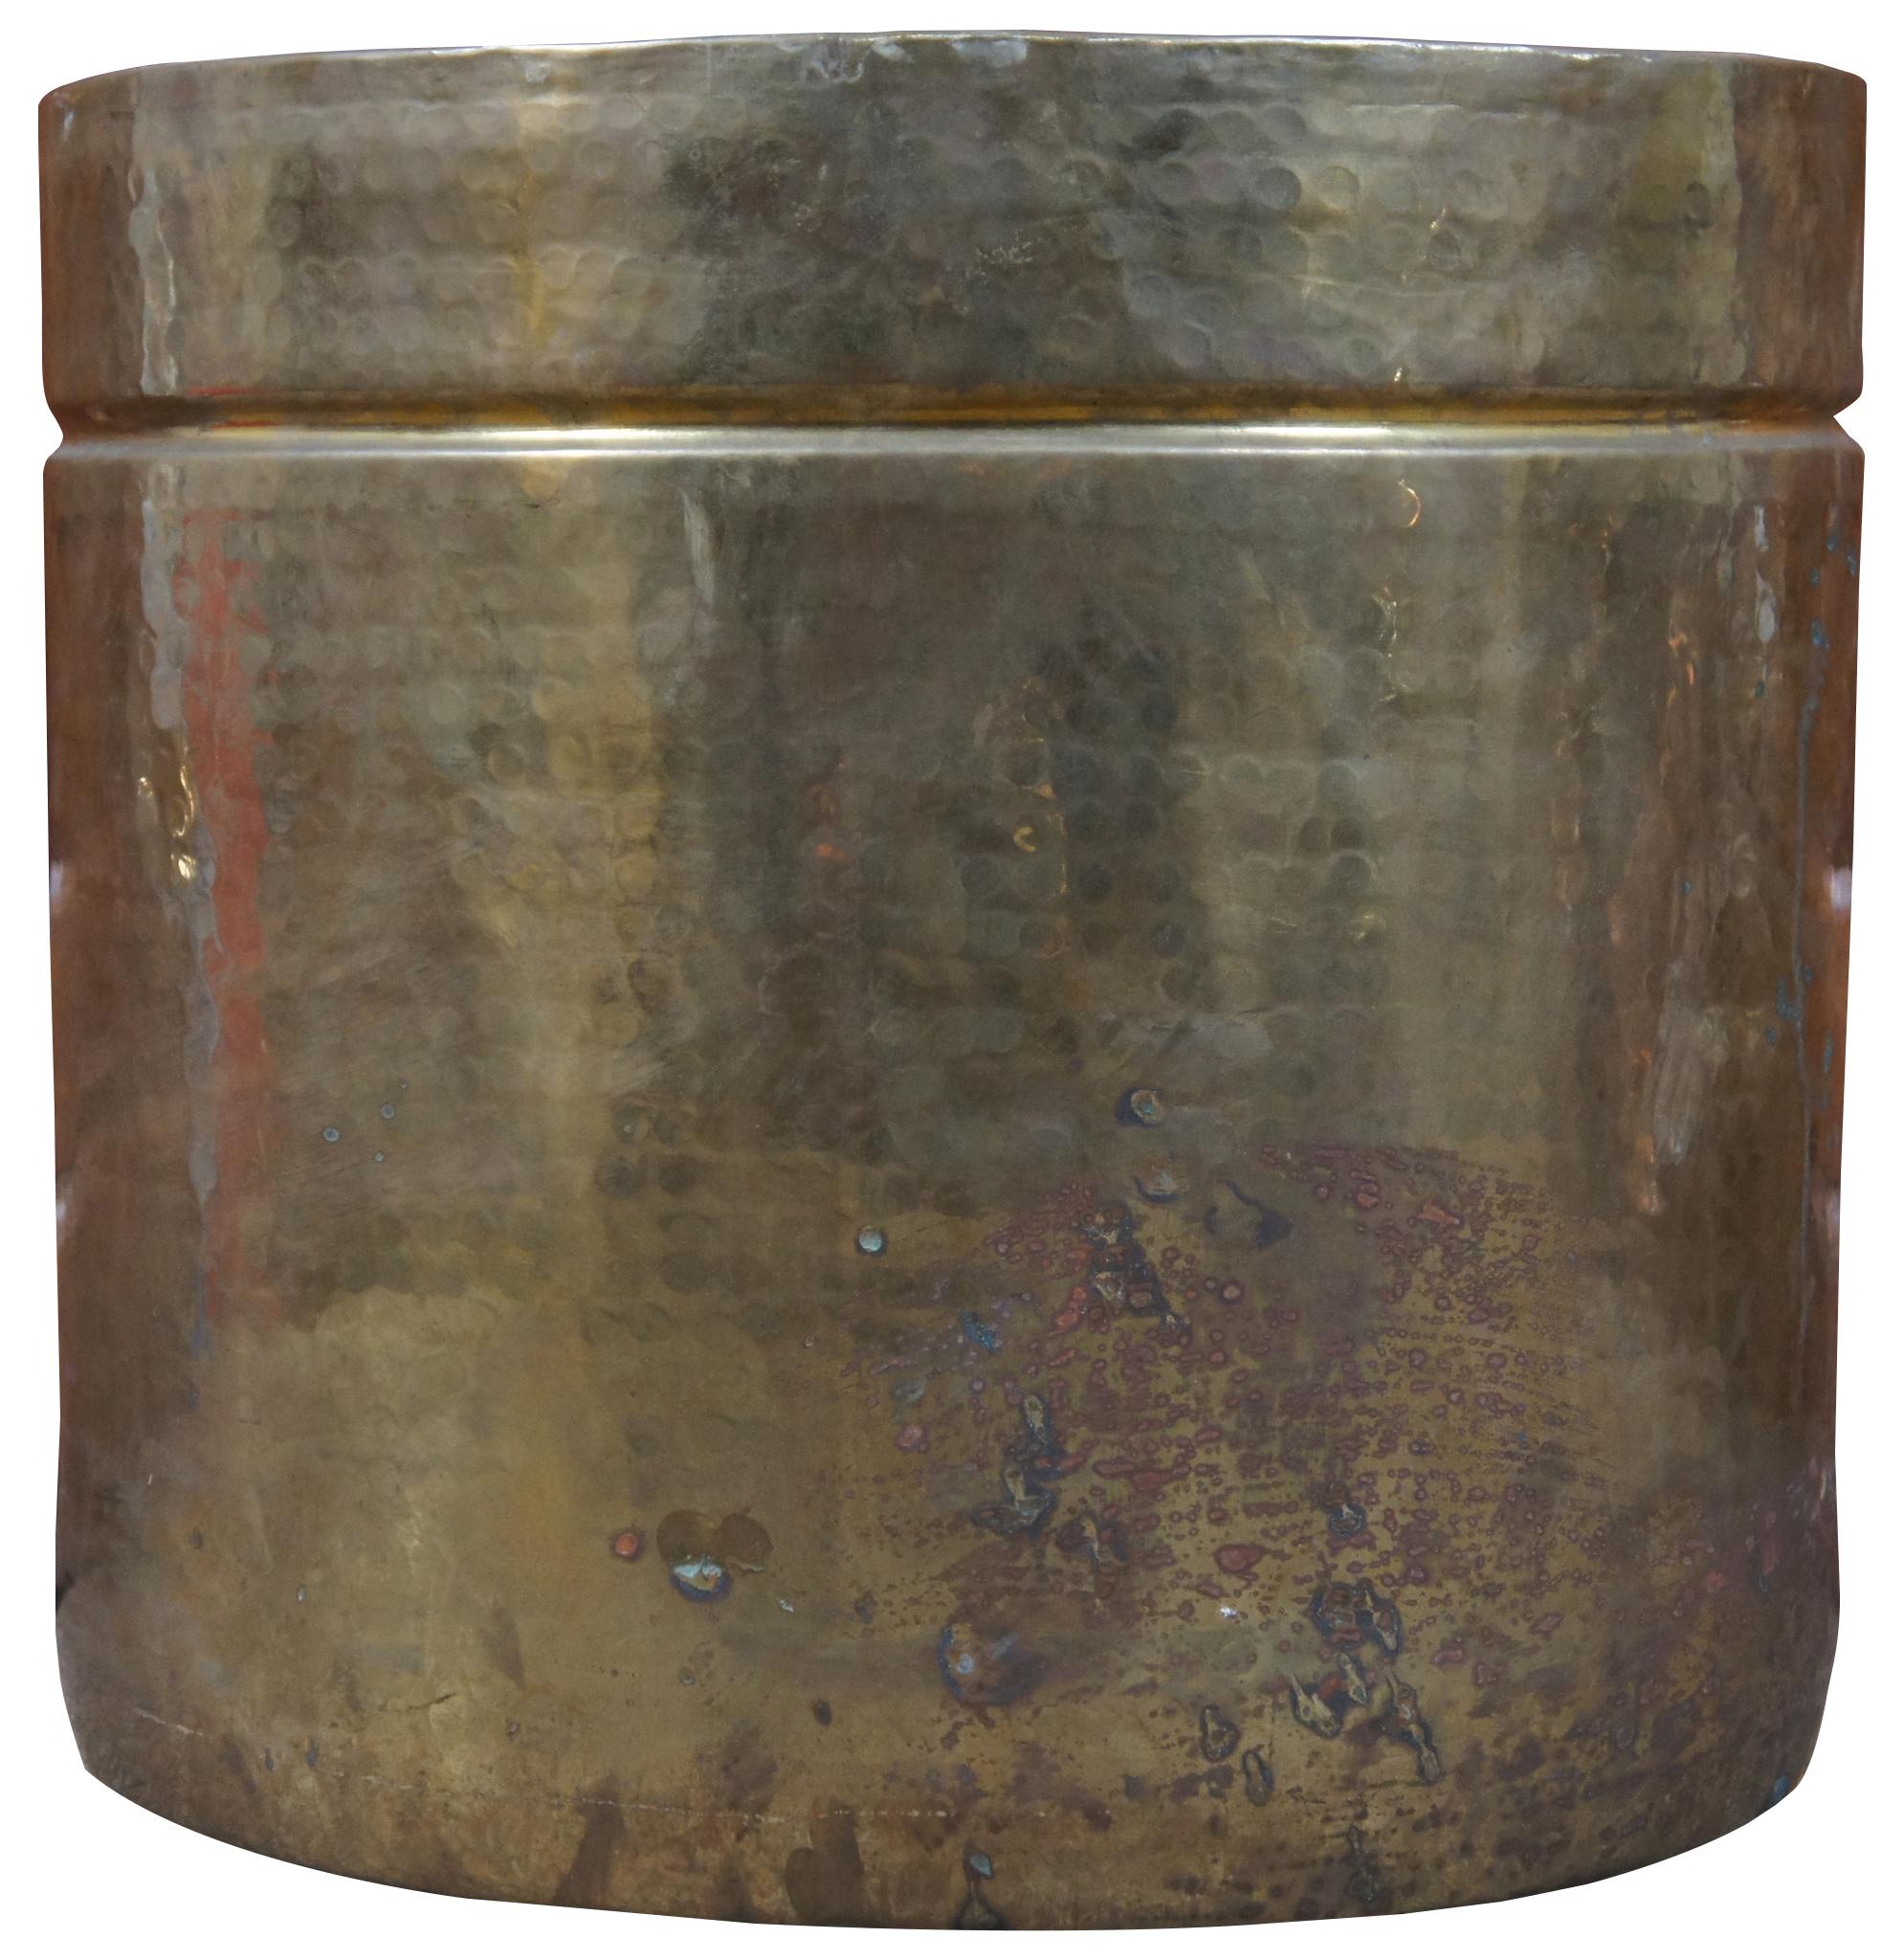 Large vintage hammered brass bucket or planter, hand made in India. Measures: 15